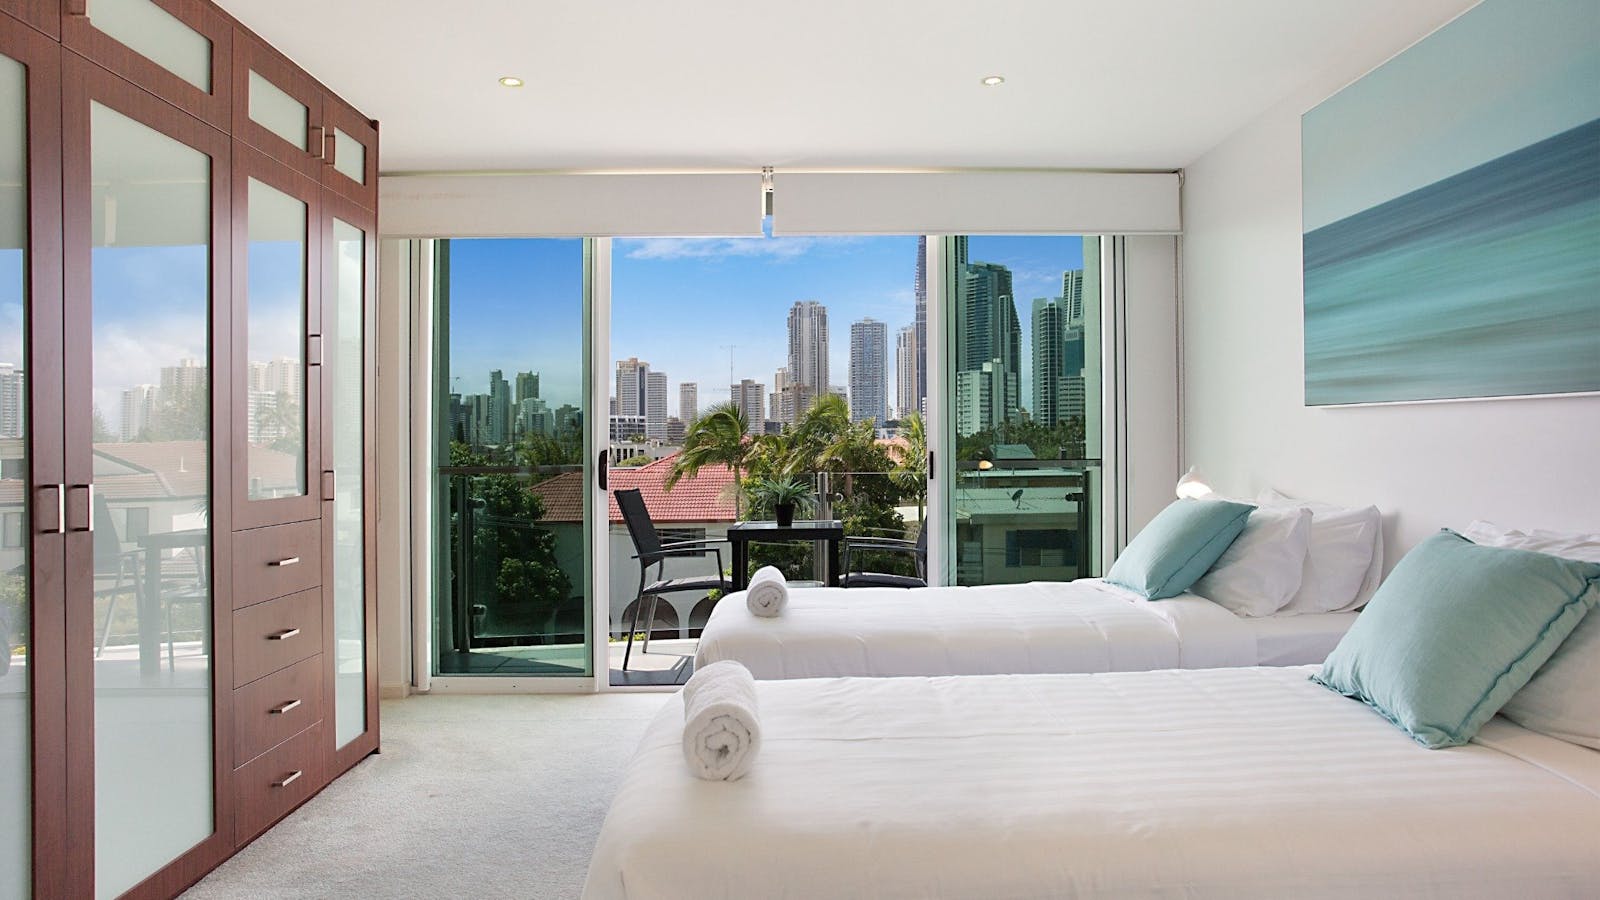 Casa Grande on the Water - Surfers Paradise - Level 2 Bedroom 1